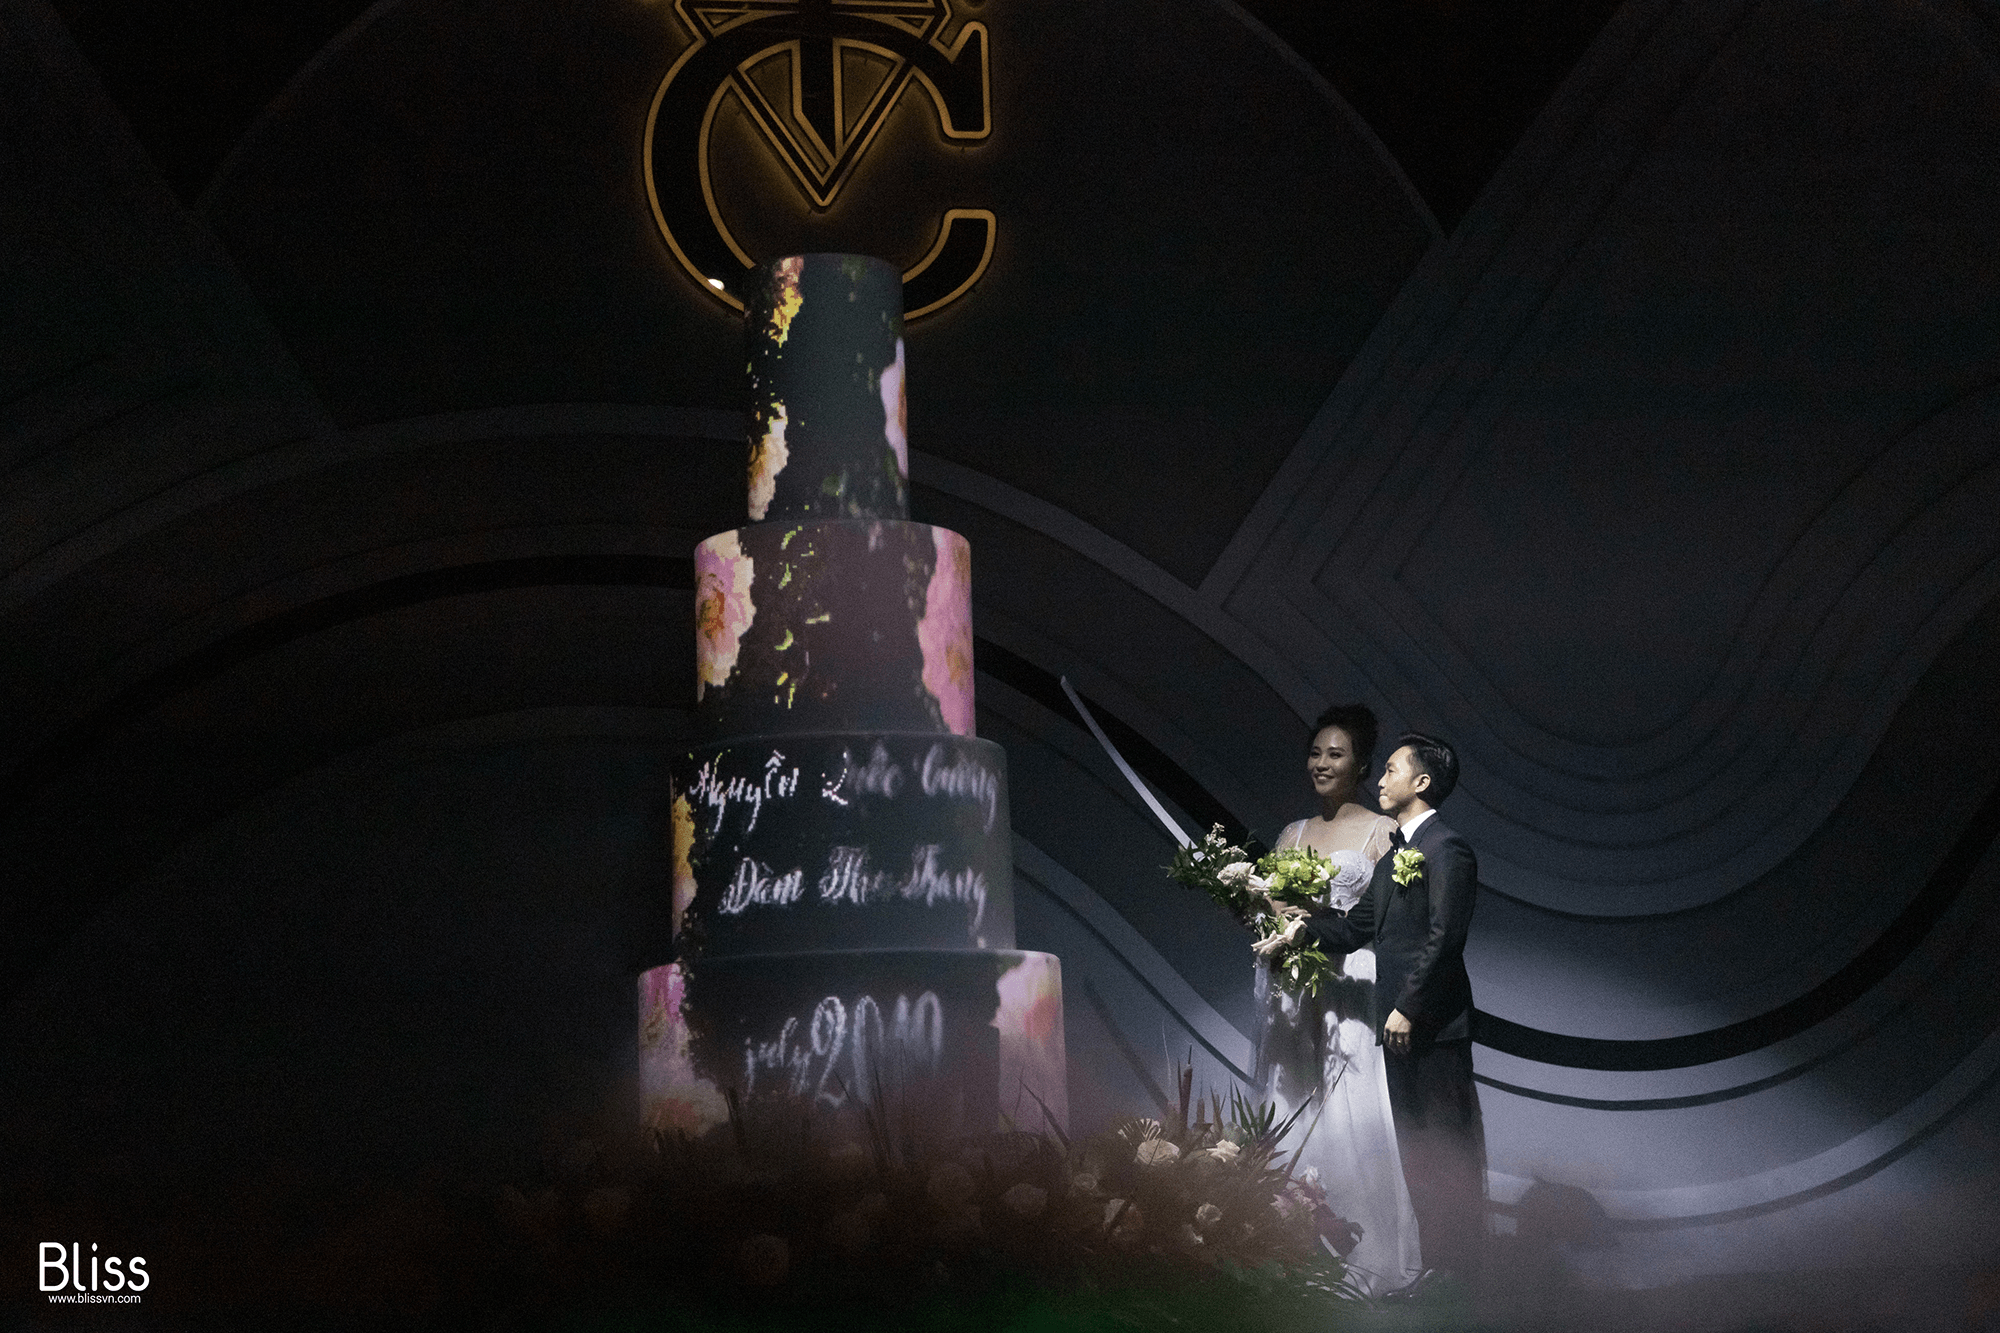 applying 3d mapping on wedding cakes, bliss weddings and events vietnam